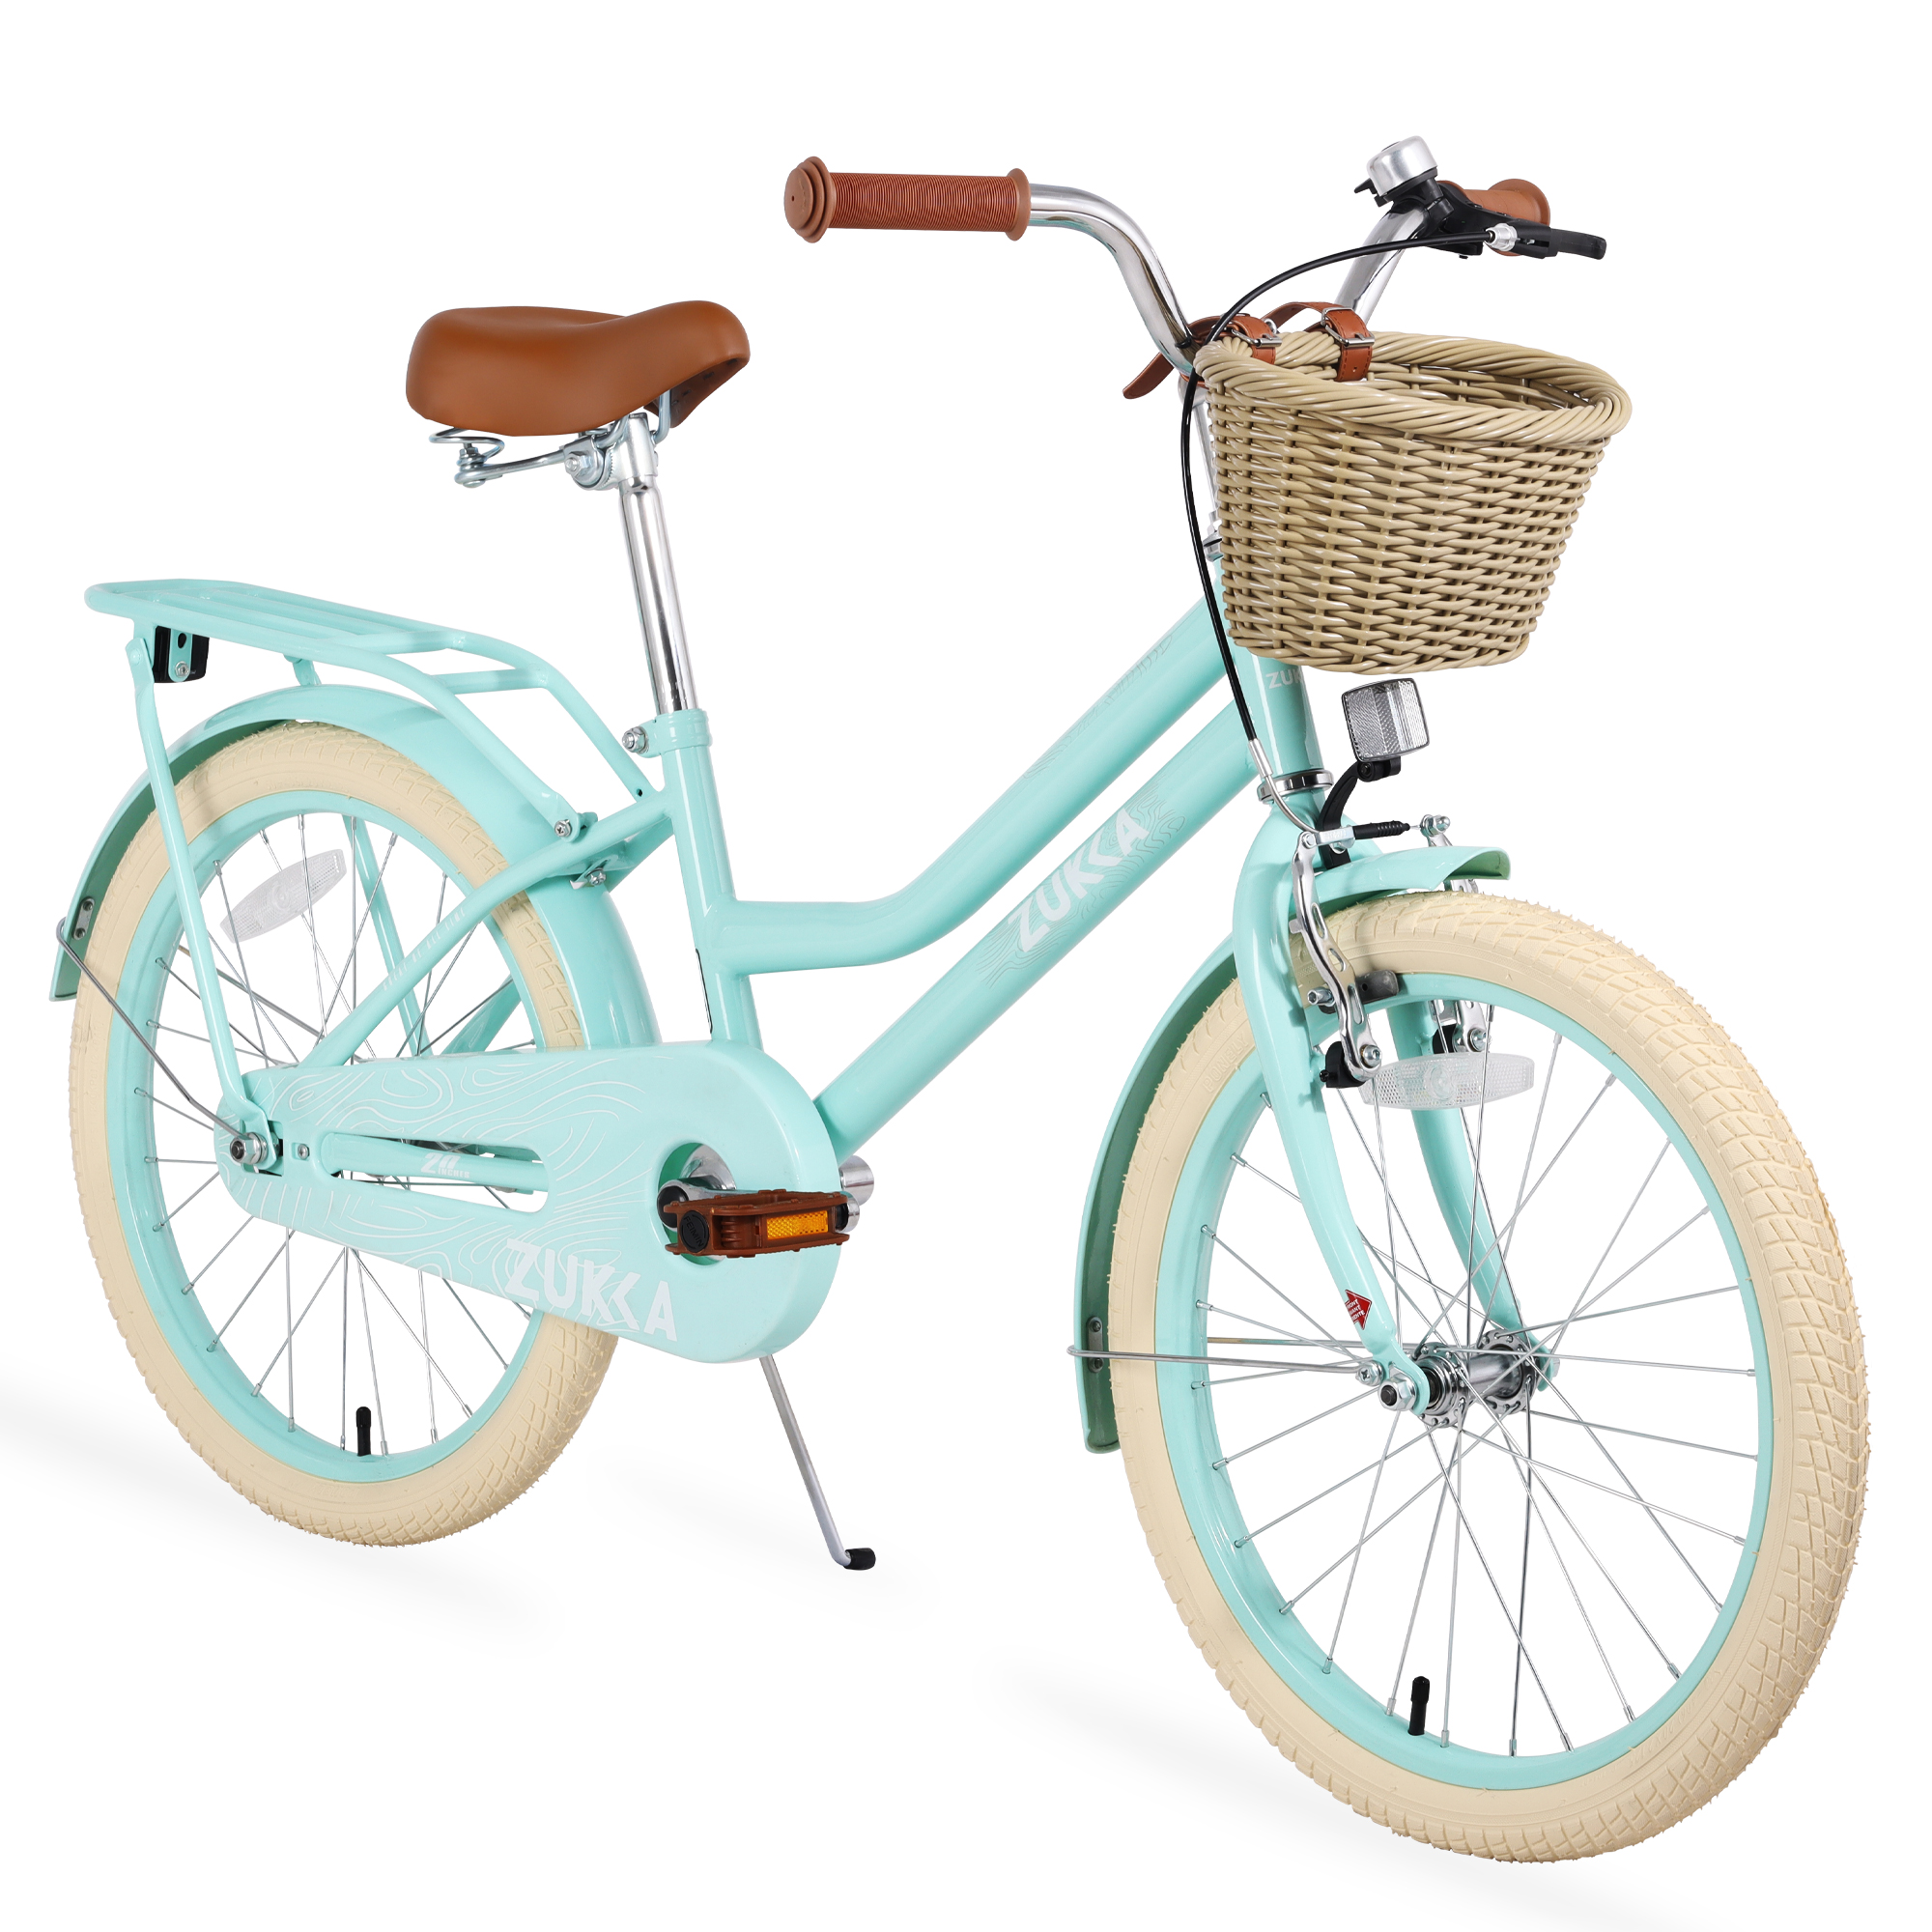 20 Inch Girls Bike with Basket For 7-10 Years Old Kids